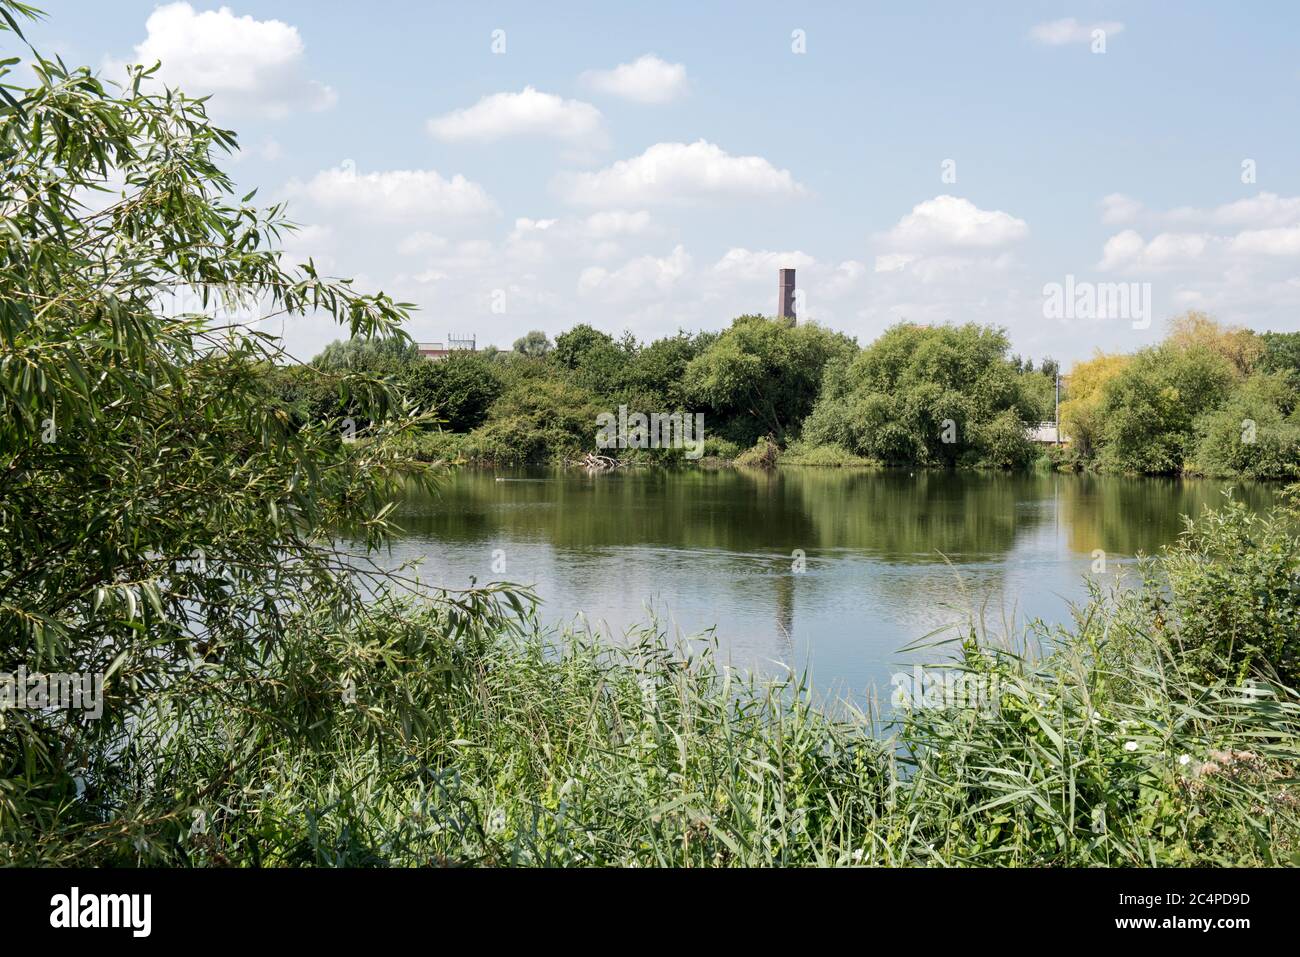 Tranquil view over water surrounded by greenery at Walthamstow Reservoirs now Walthamstow Wetlands an inner city wetland site and urban nature reserve Stock Photo